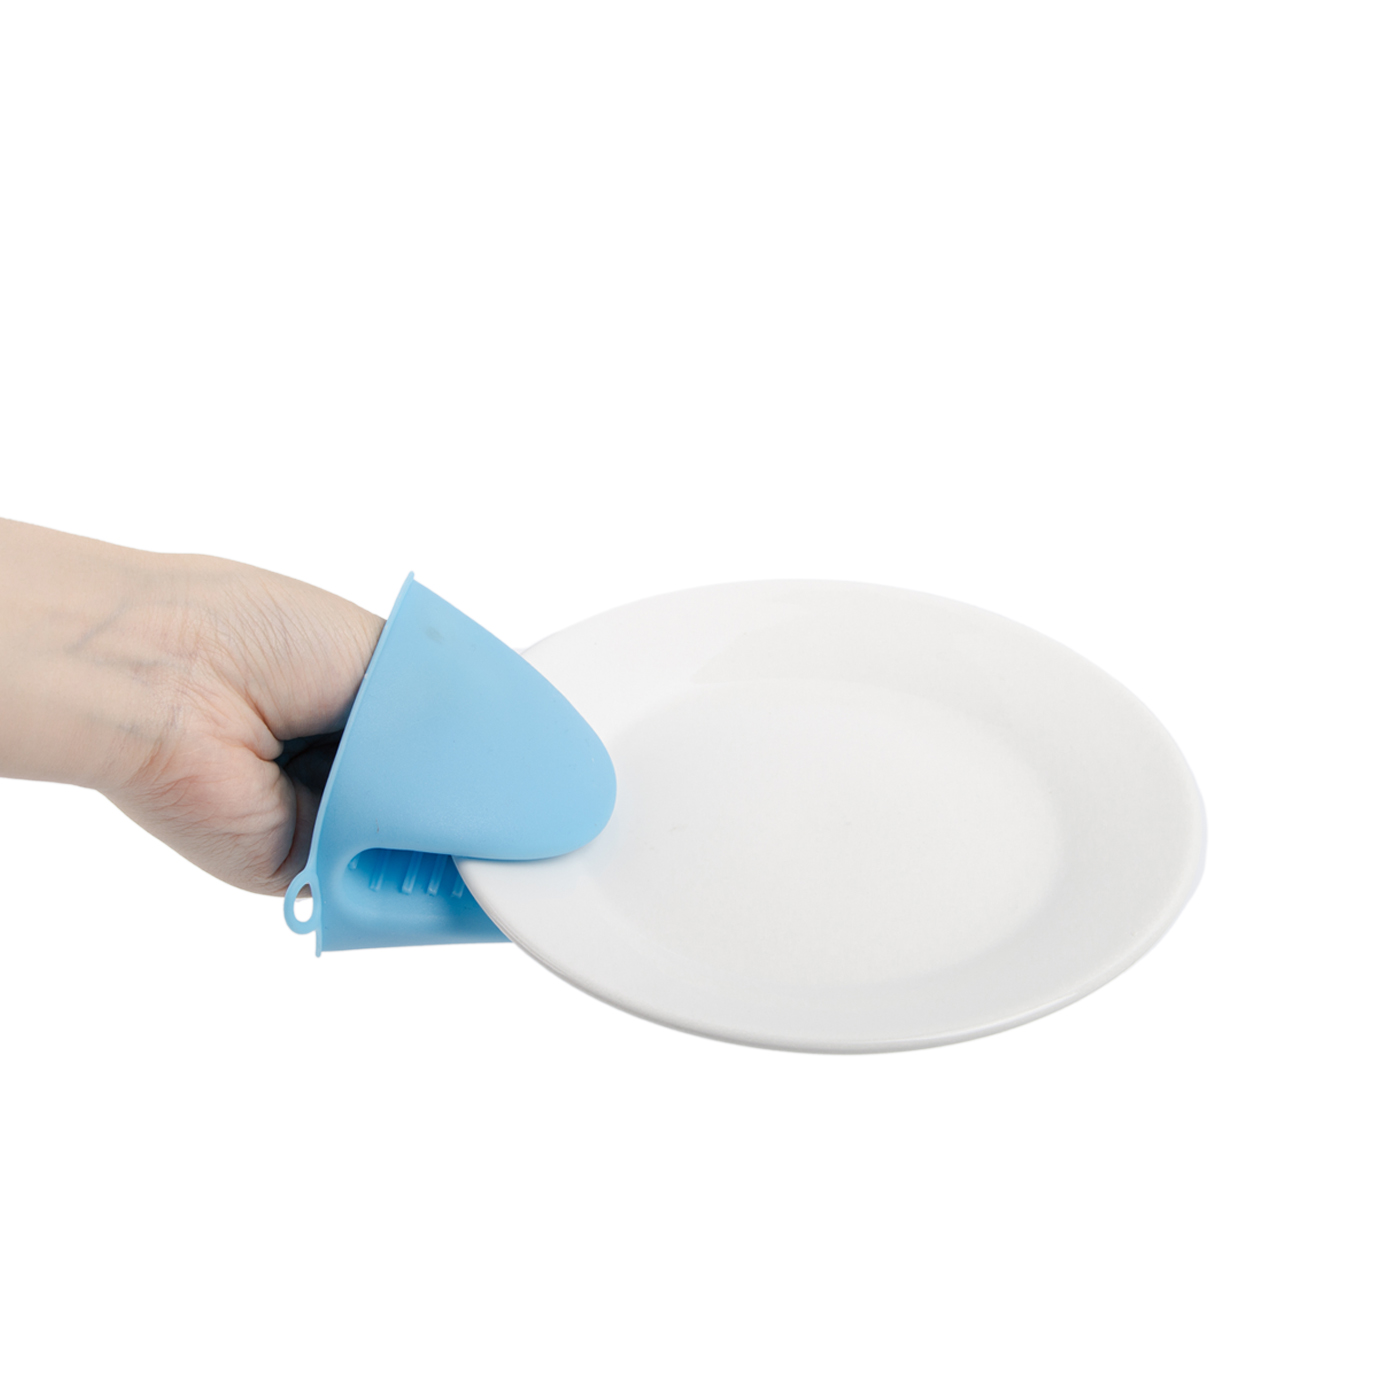 Silicone Oven Pinch Grip3